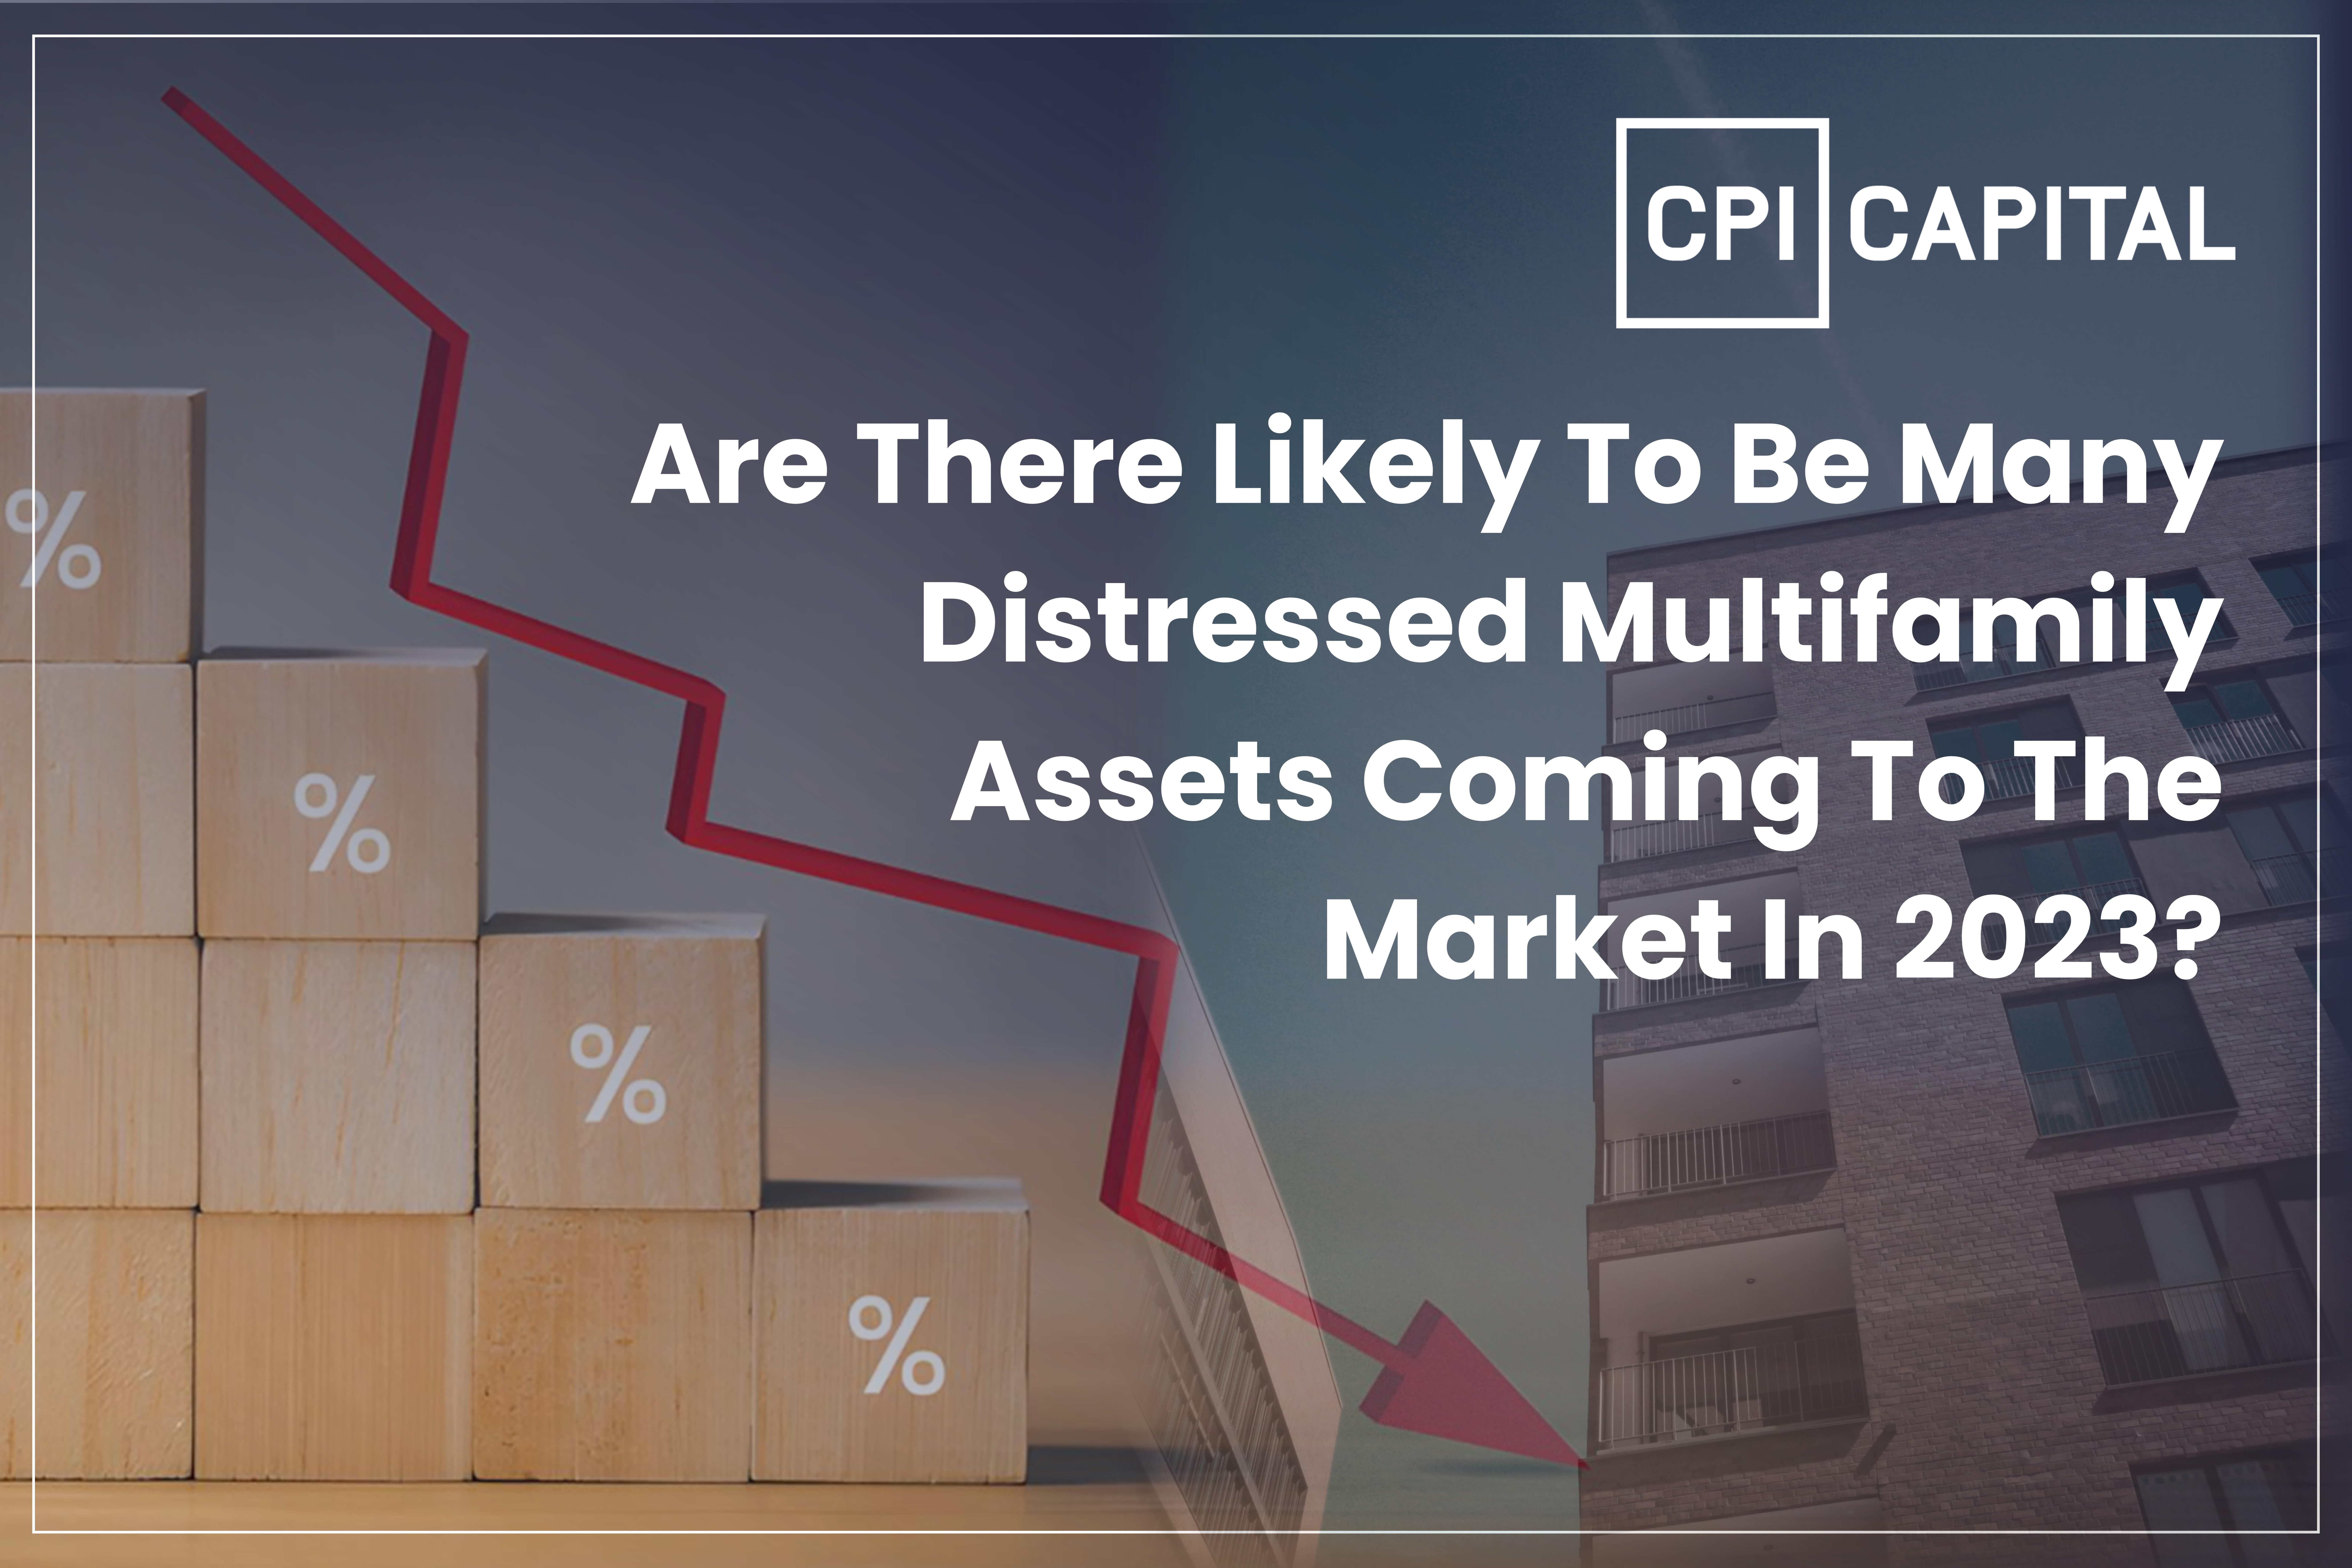 Are There Likely To Be Many Distressed Multifamily Assets Coming To The Market In 2023?